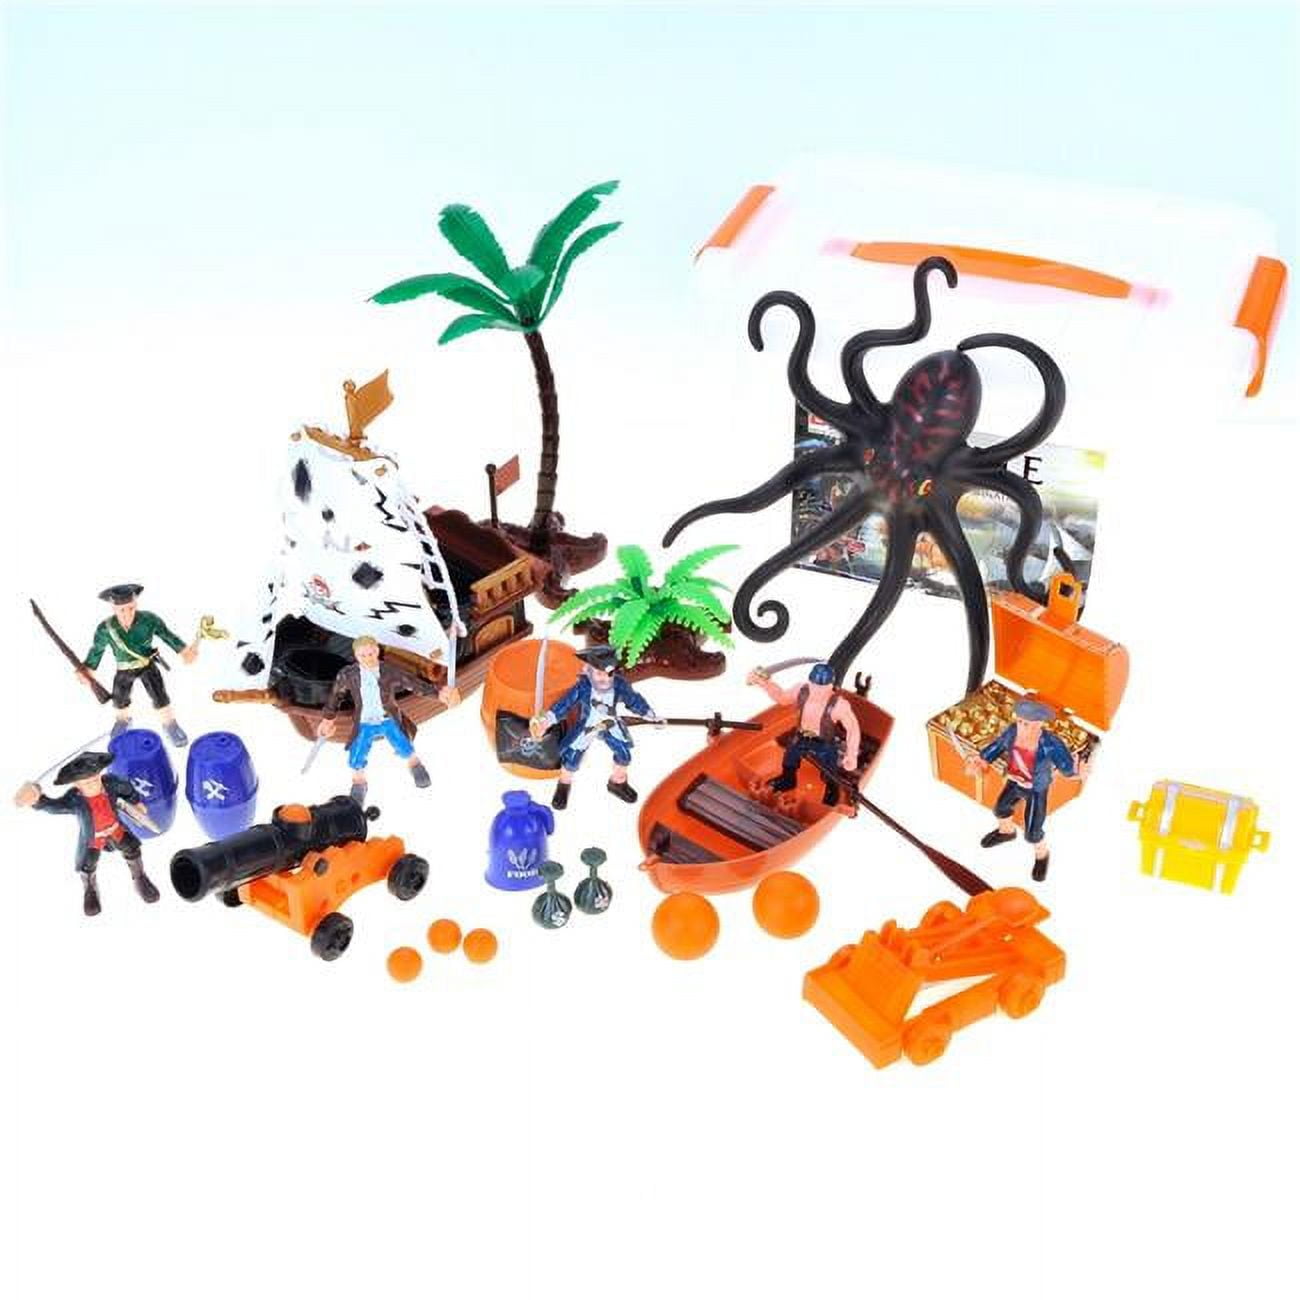 Picture of AZ Trading PSQ0807 Bucket of Pirate Action Figures Playset, Multi Color